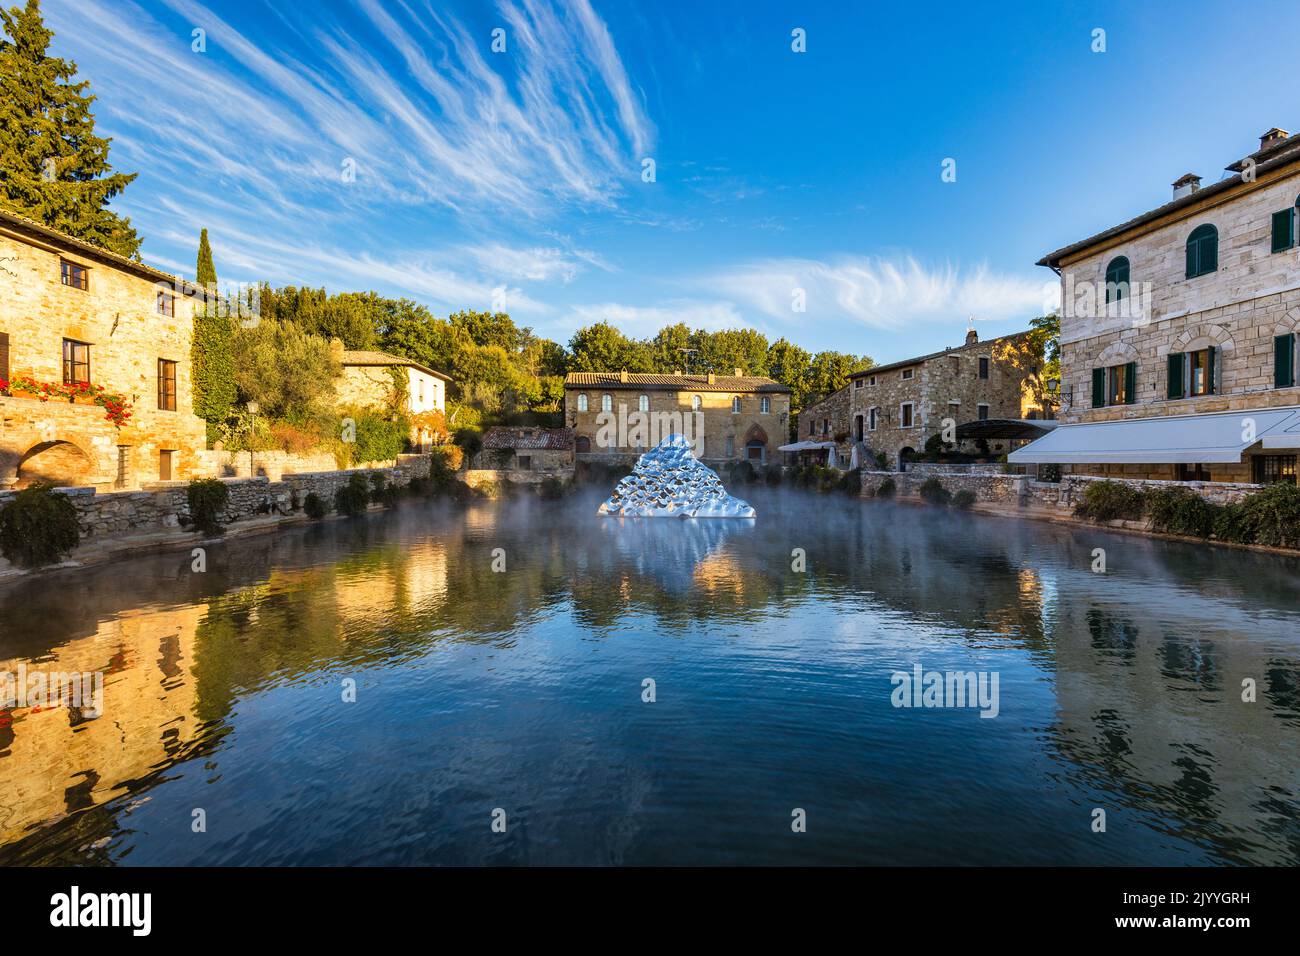 Thermal bath town of Bagno Vignoni, Italy during sunrise. Old thermal baths in the medieval village Bagno Vignoni, Tuscany, Italy. Medieval thermal ba Stock Photo